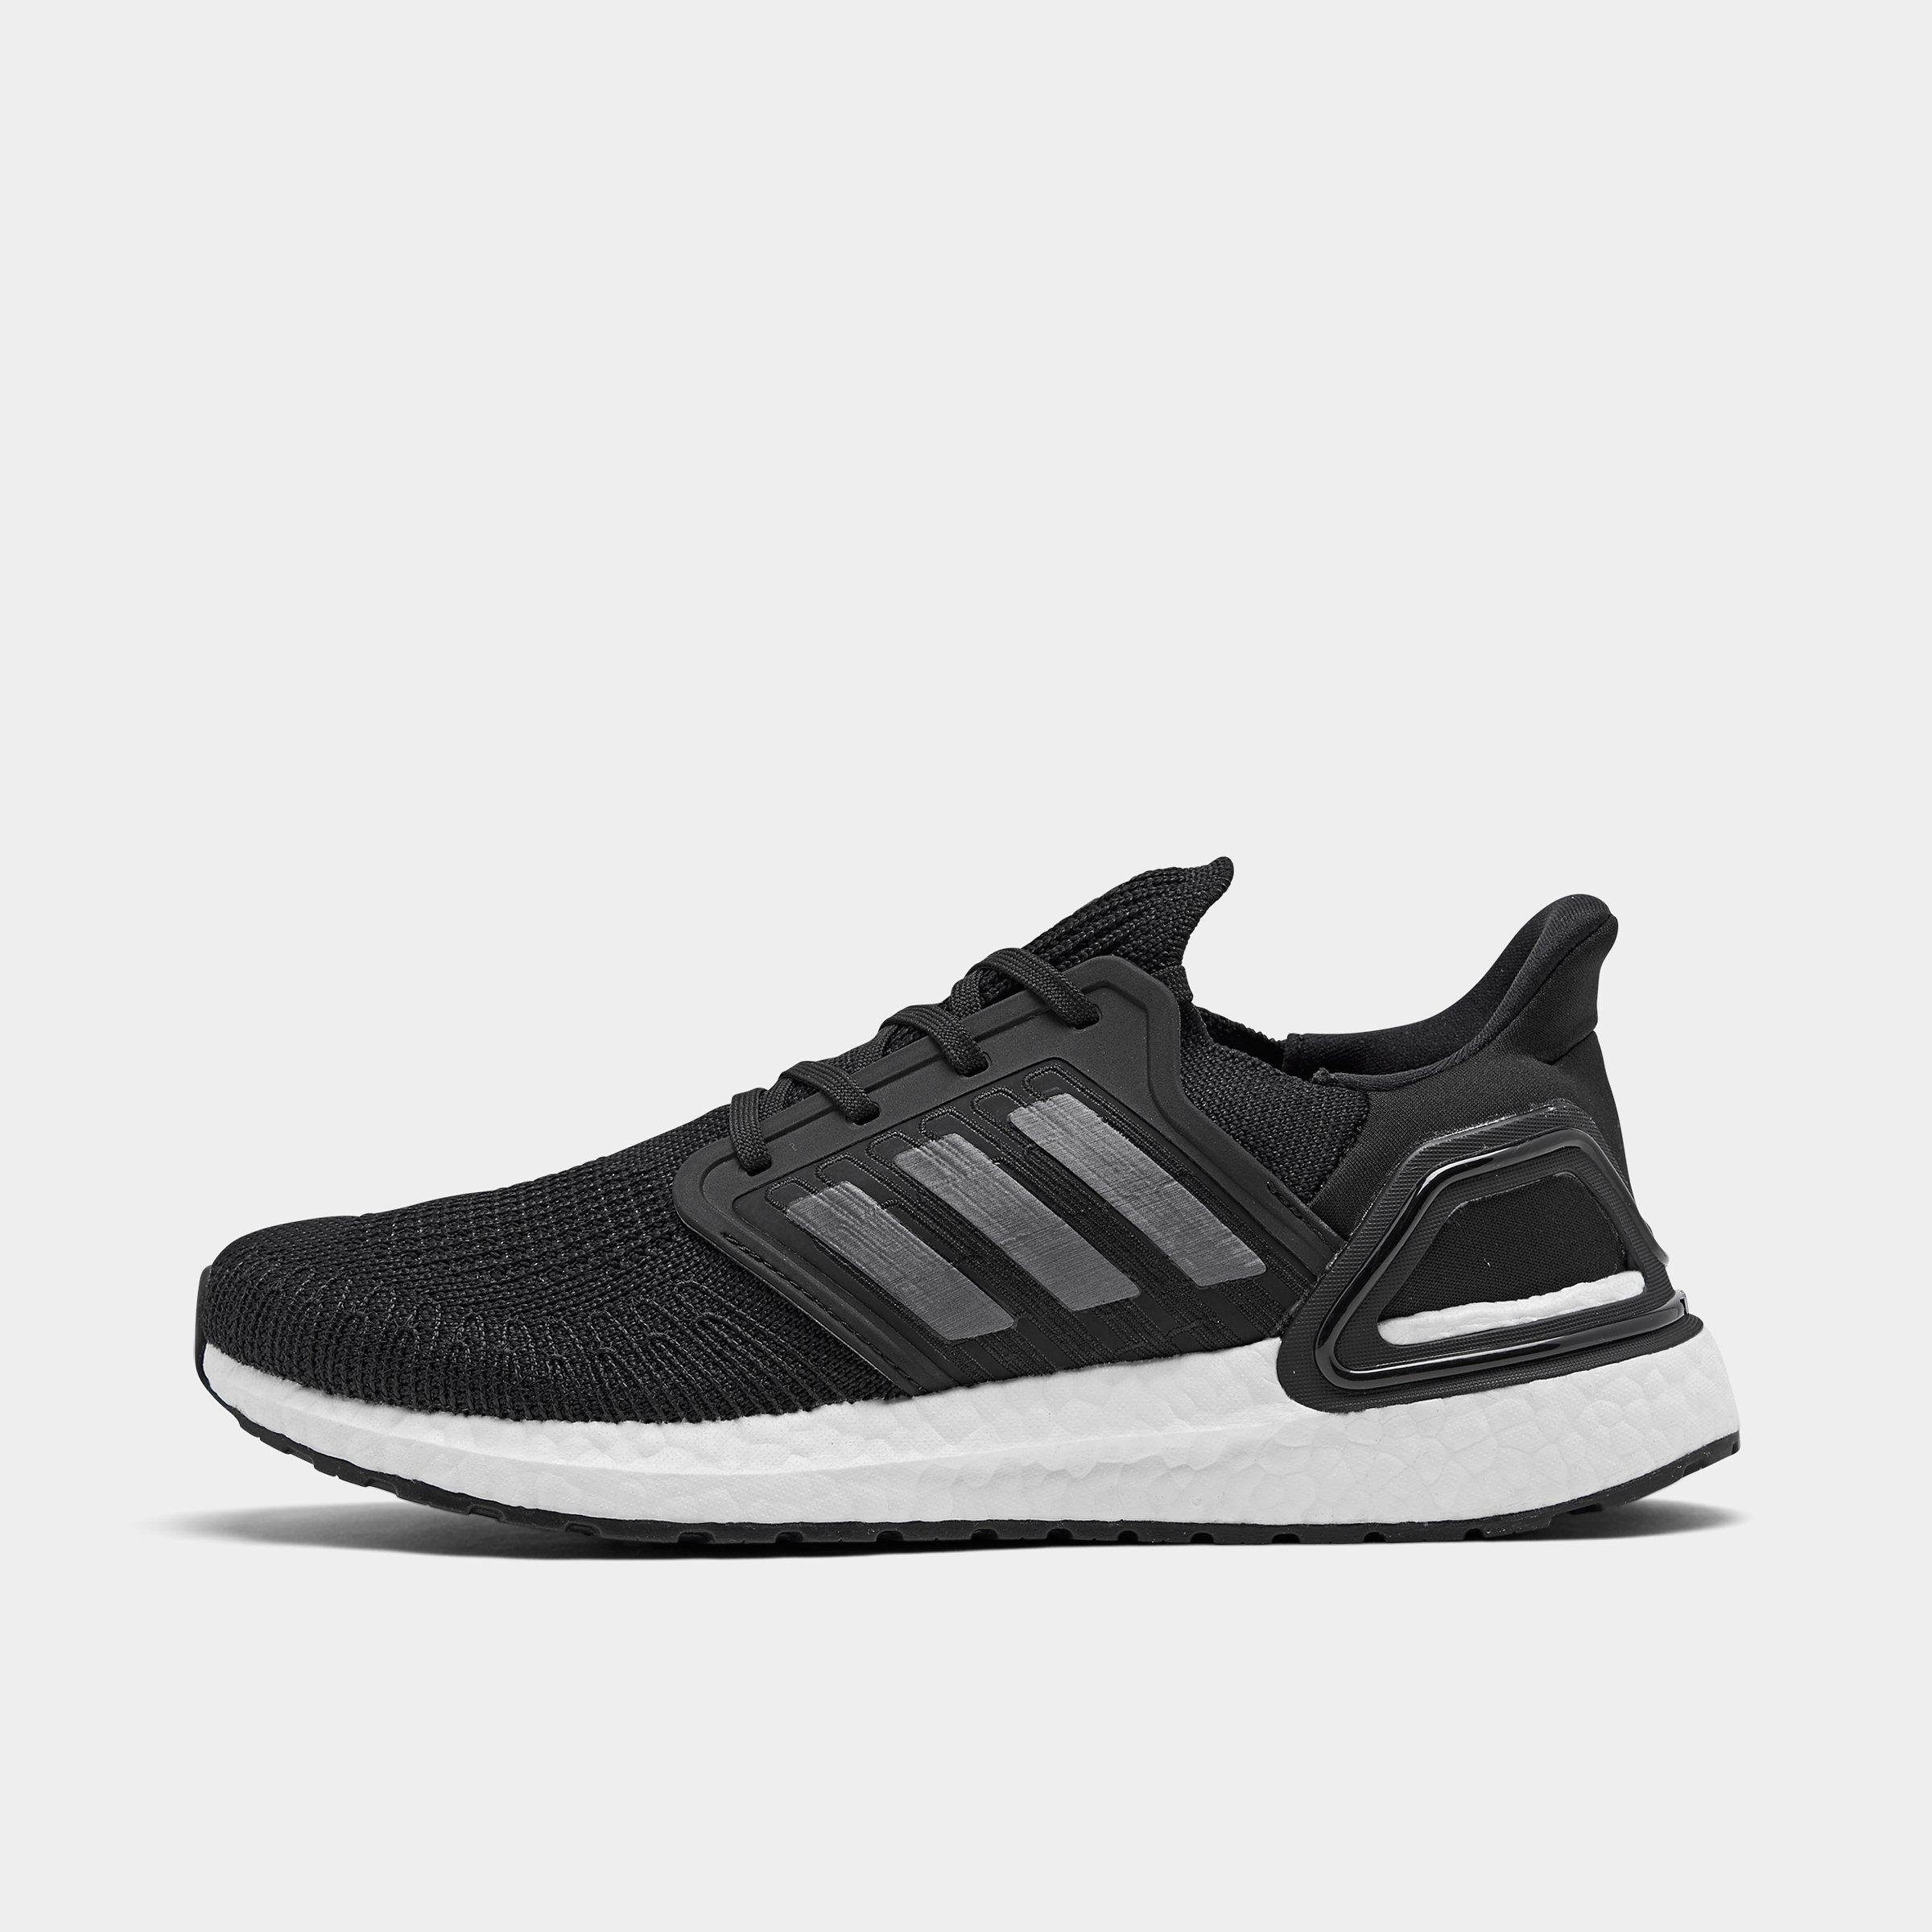 adidas shoes and price